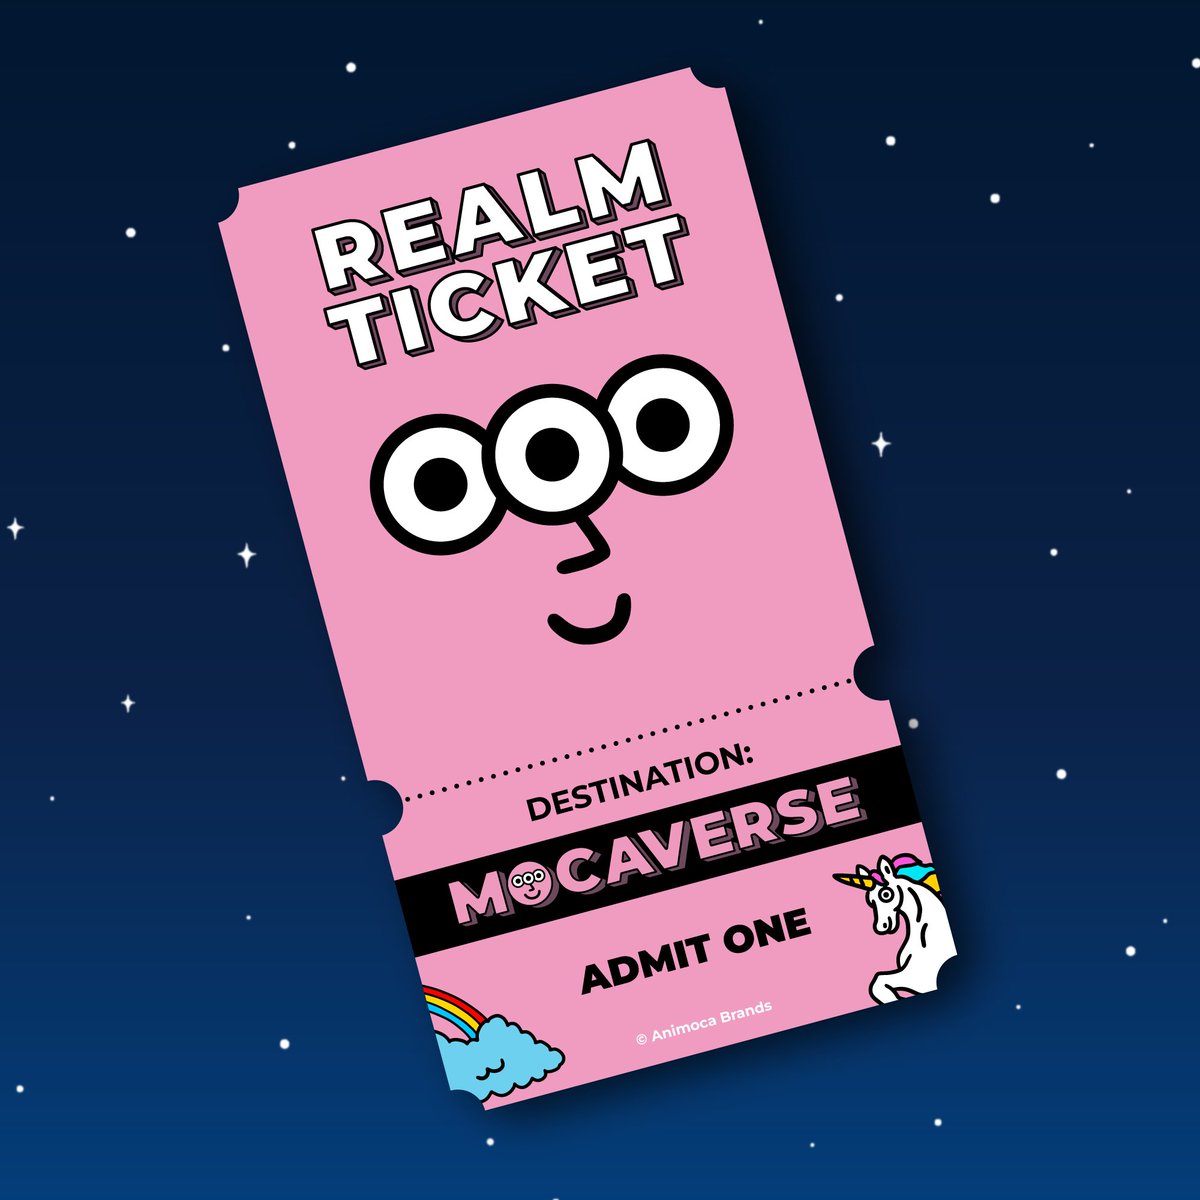 .@MocaverseNFT personal giveaway! I'm giving away 100 Mocaverse Realm Ticket #NFTs that I recently bought on @opensea To enter: 1⃣ Like❤️ & RT🔄 2⃣ Follow @MocaverseNFT @ysiu @animocabrands @animocaresearch & Tag 3 friends who you think should know more about #web3 #mocaverse